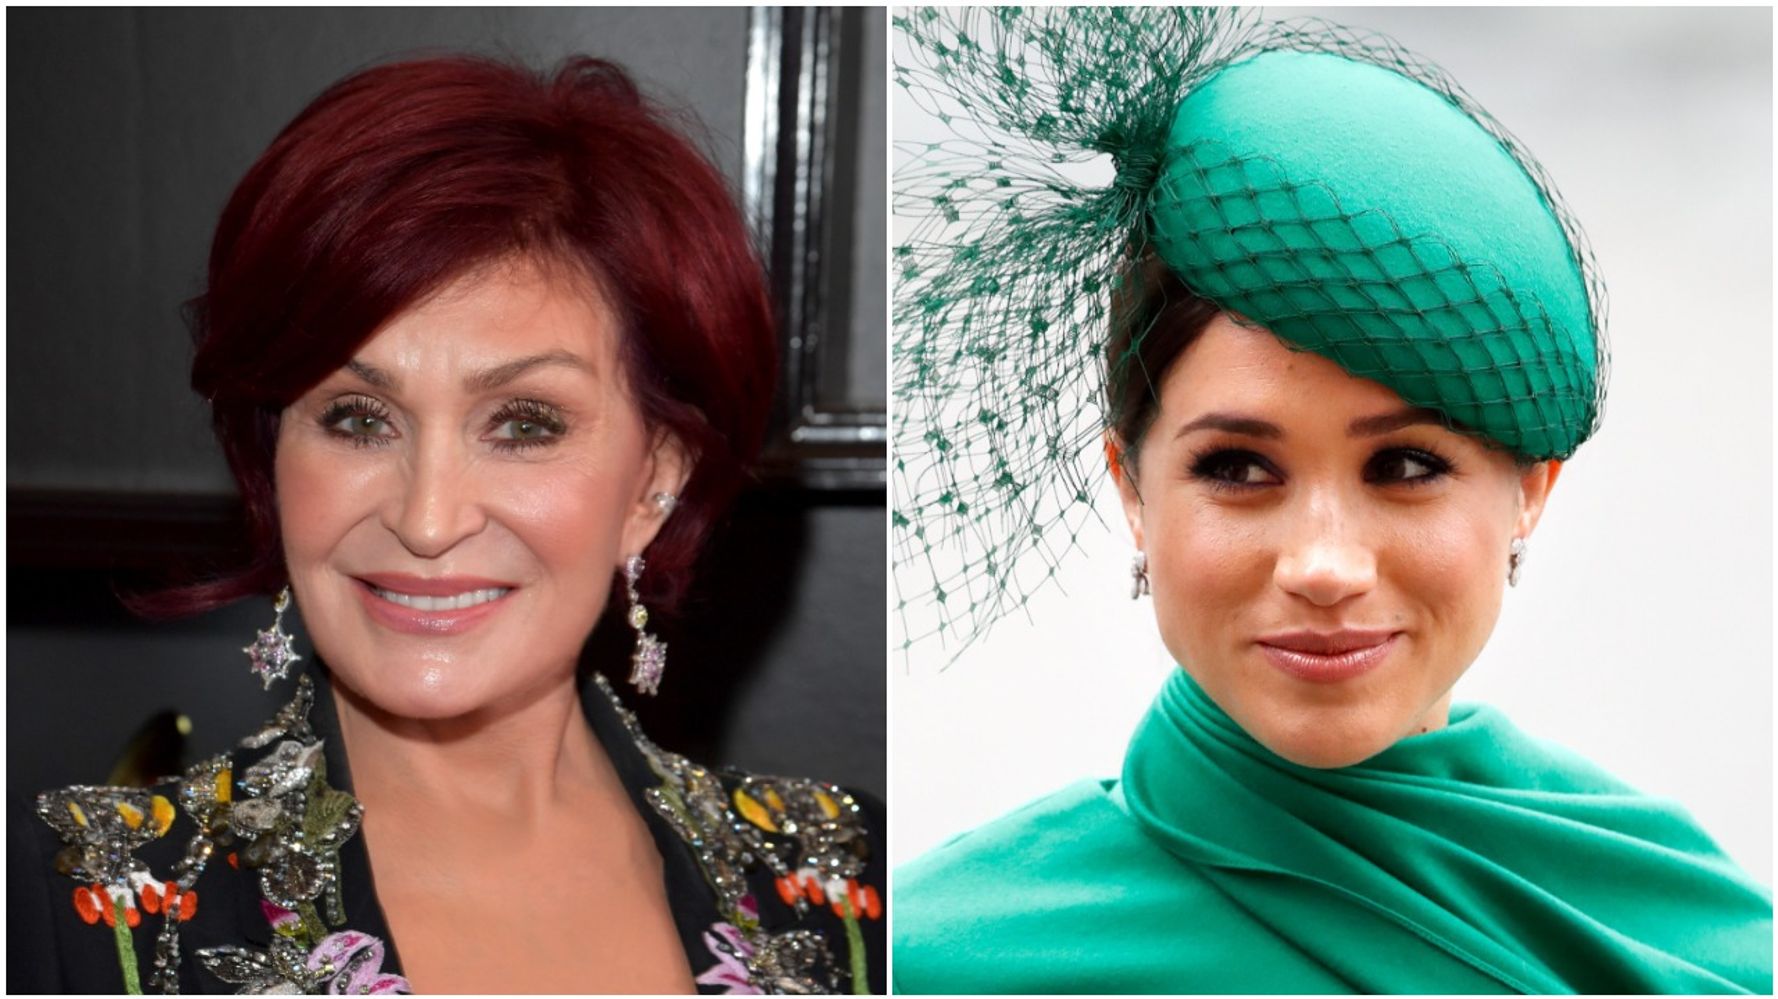 The resurfaced video shows Sharon Osbourne saying that Meghan Markle “Ain’t Black”